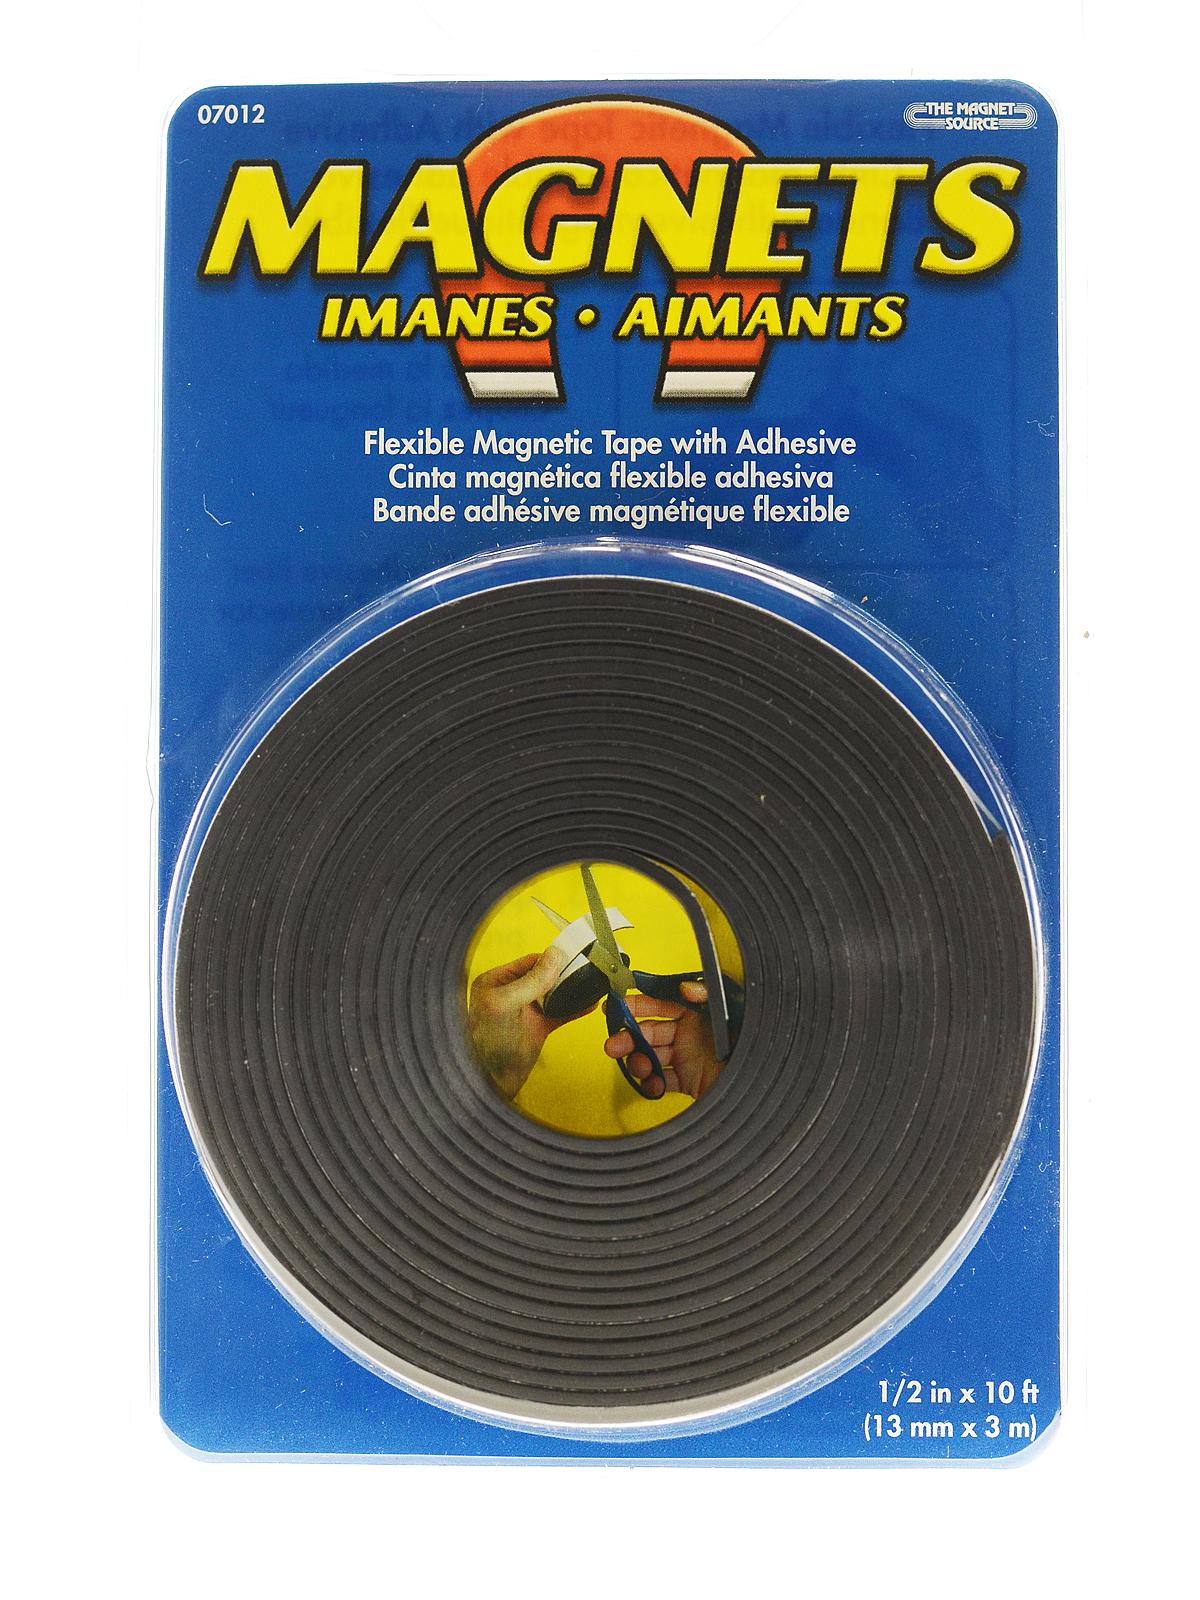 Flexible Magnetic Strips With Adhesive 1 2 In. X 10 Ft.